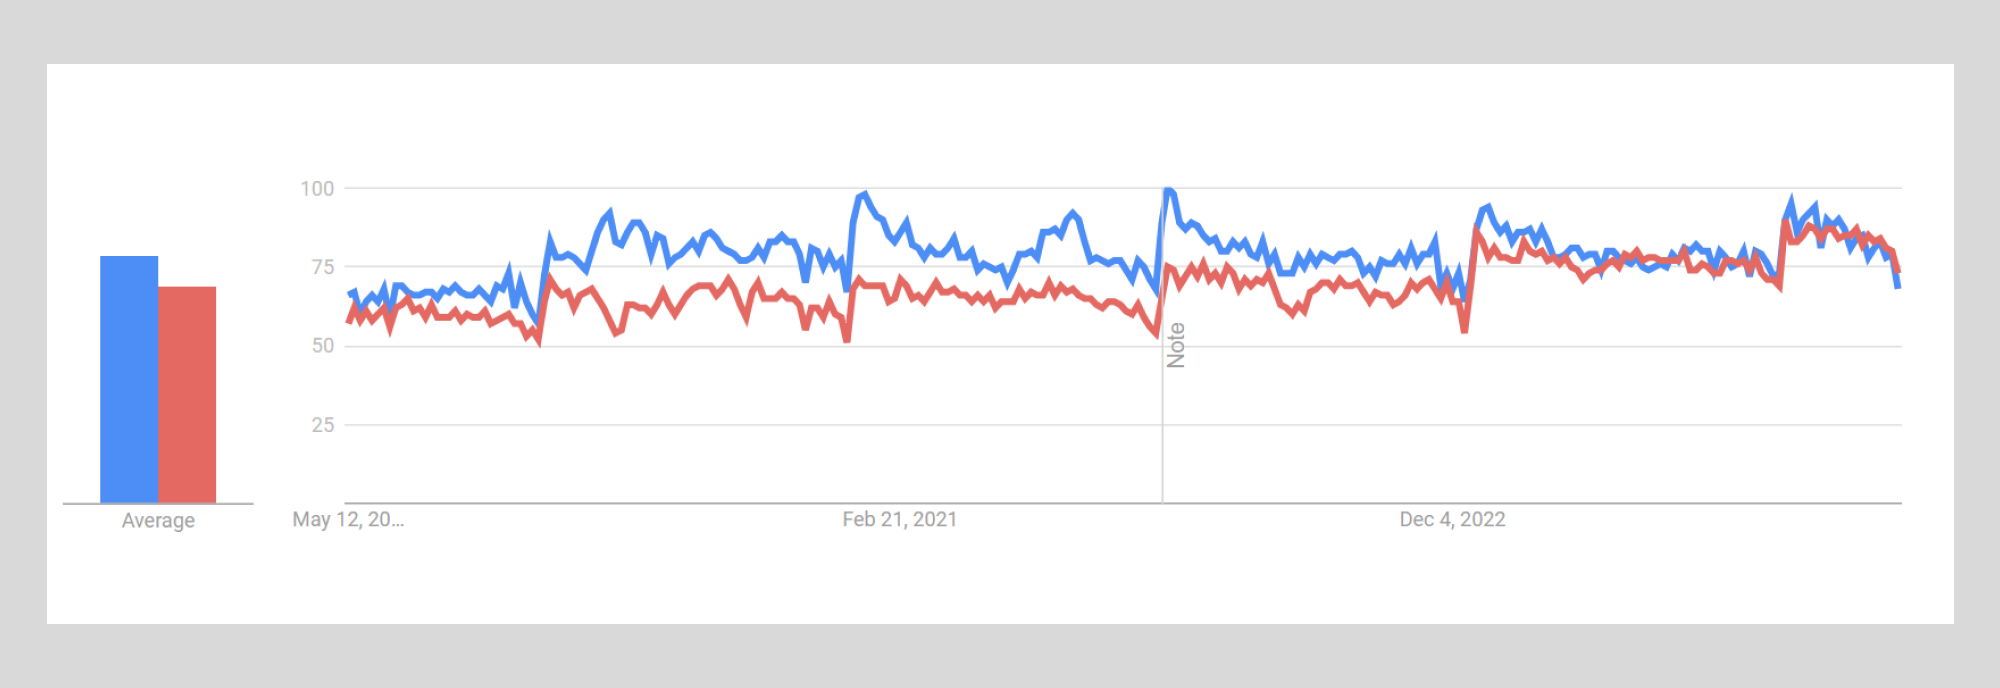 vitamins and supplements-google trends